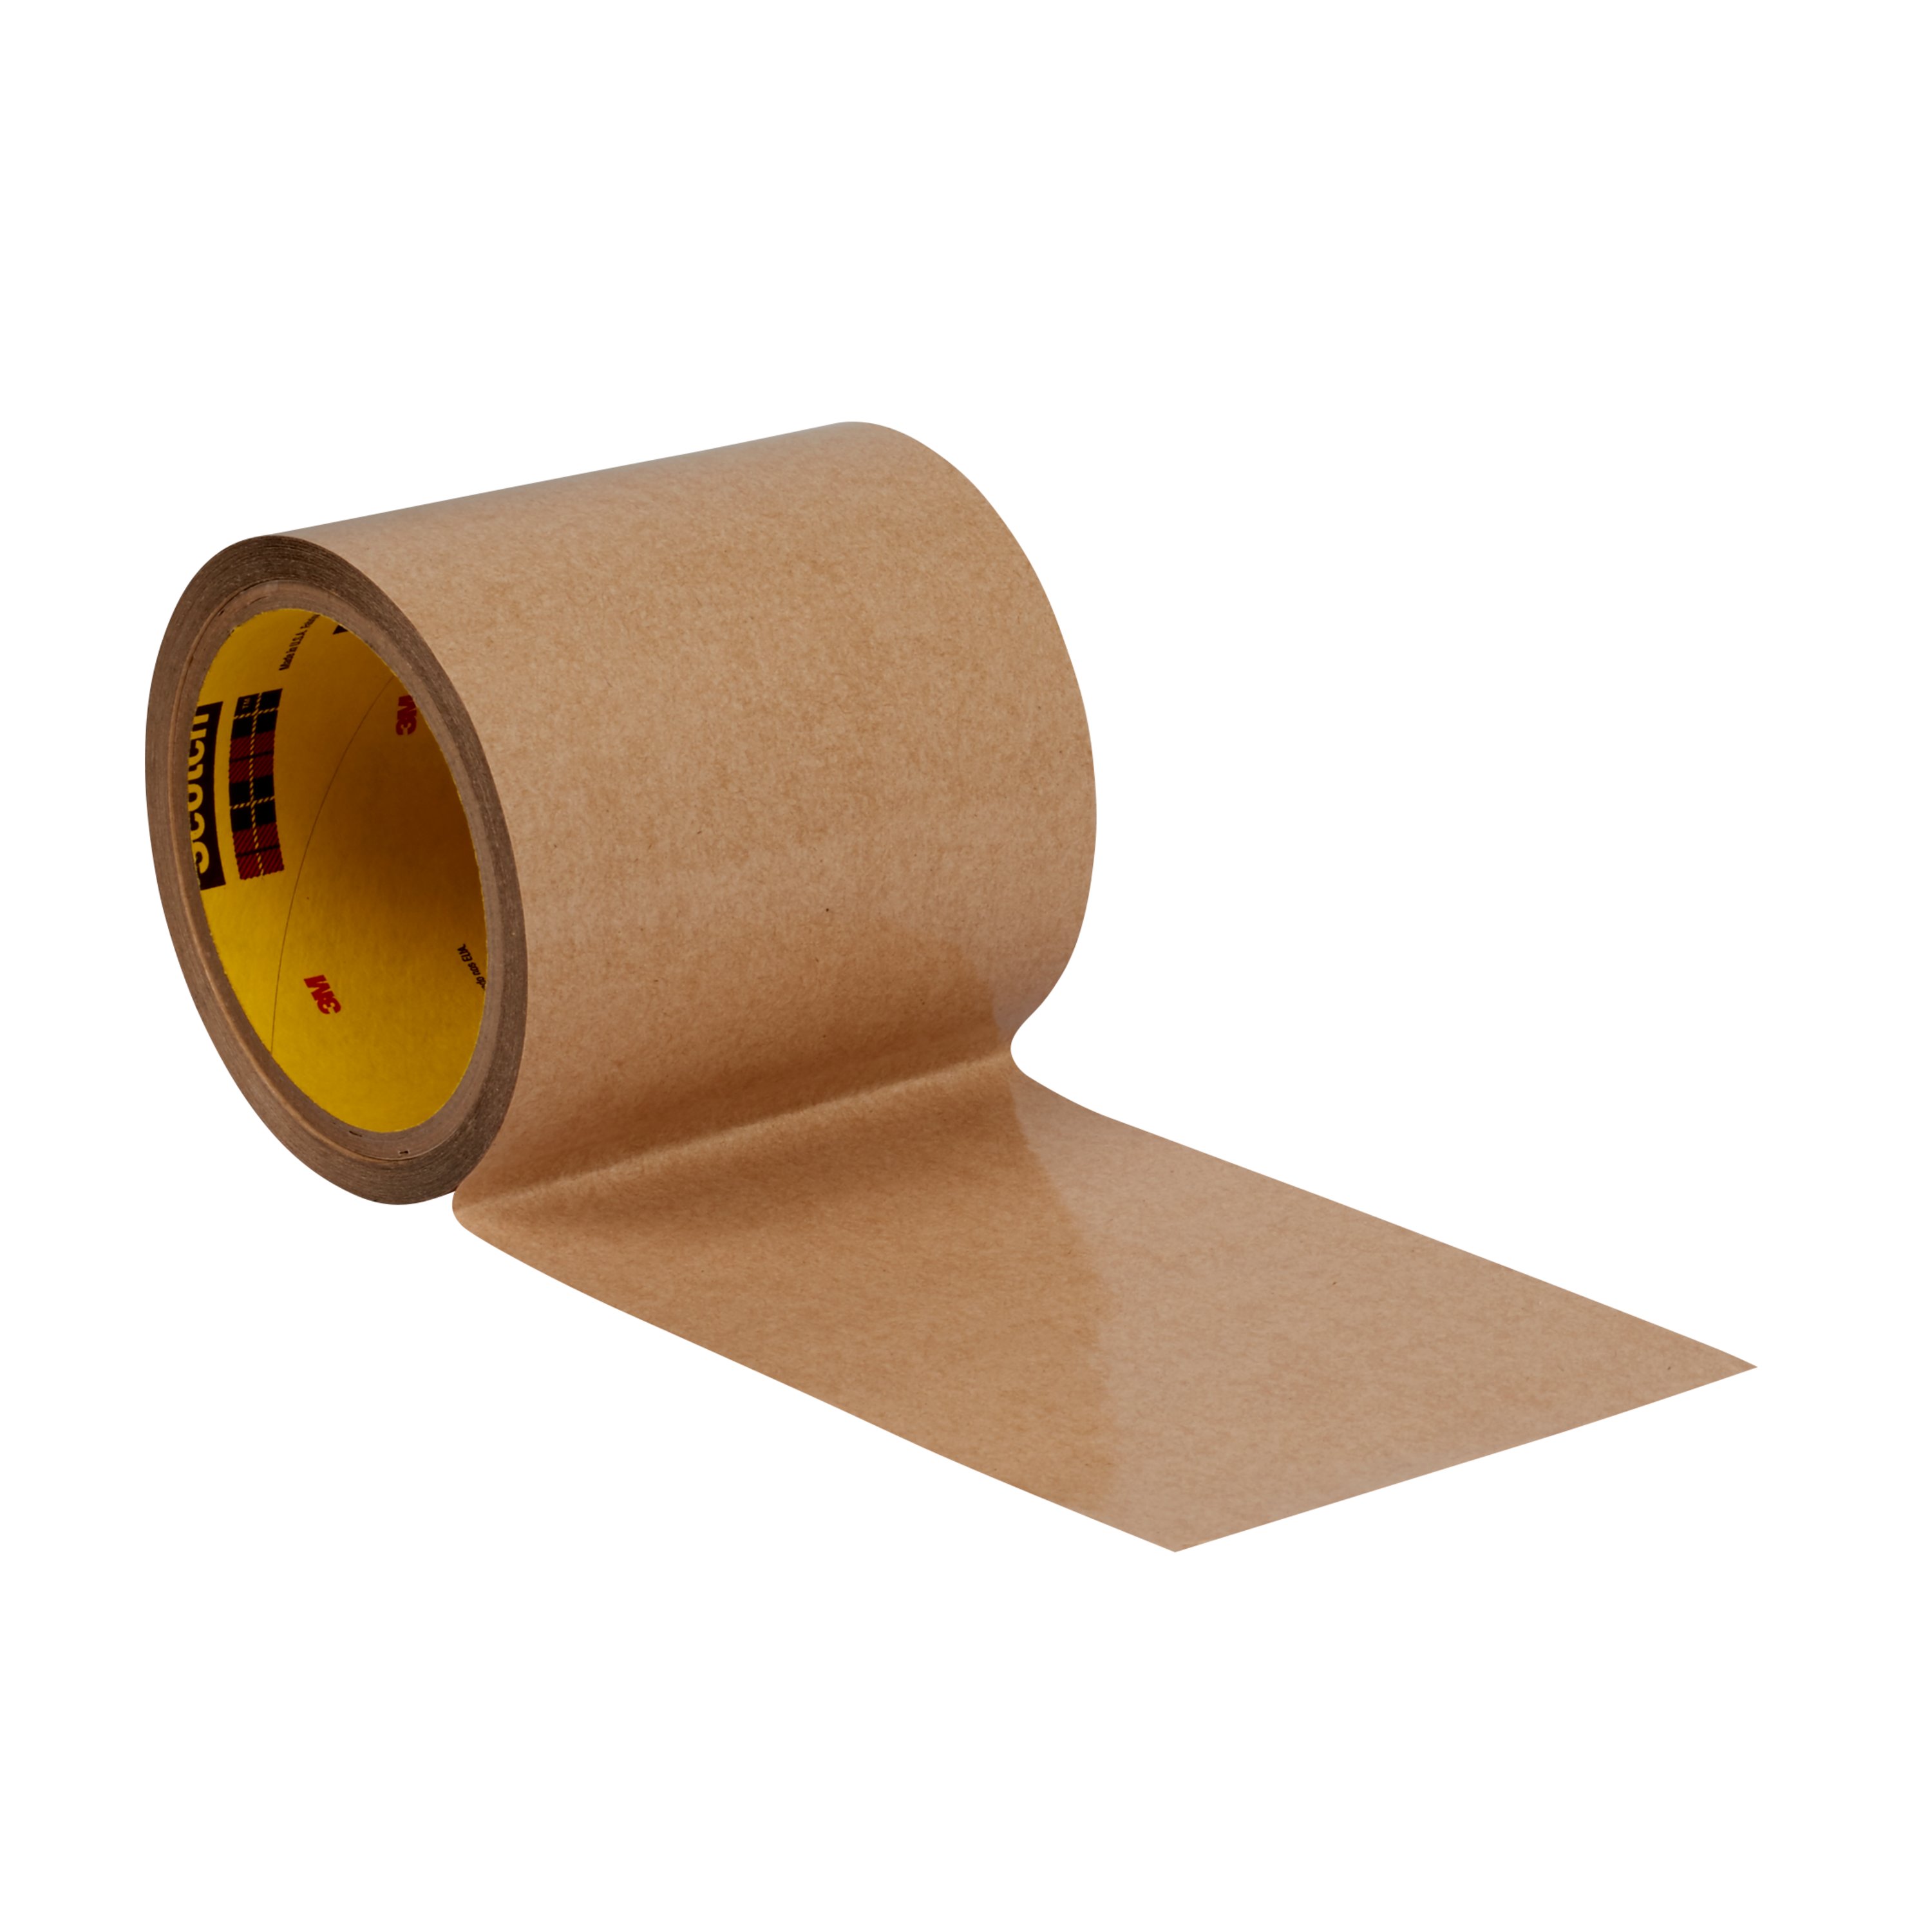 3M™ Adhesive Transfer Tape 9482PC is a 2.0 mils (.05 mm) thick transfer tape consisting of the 3M™ Adhesive 350, a modified high performance acrylic adhesive designed for applications requiring high shear strength.